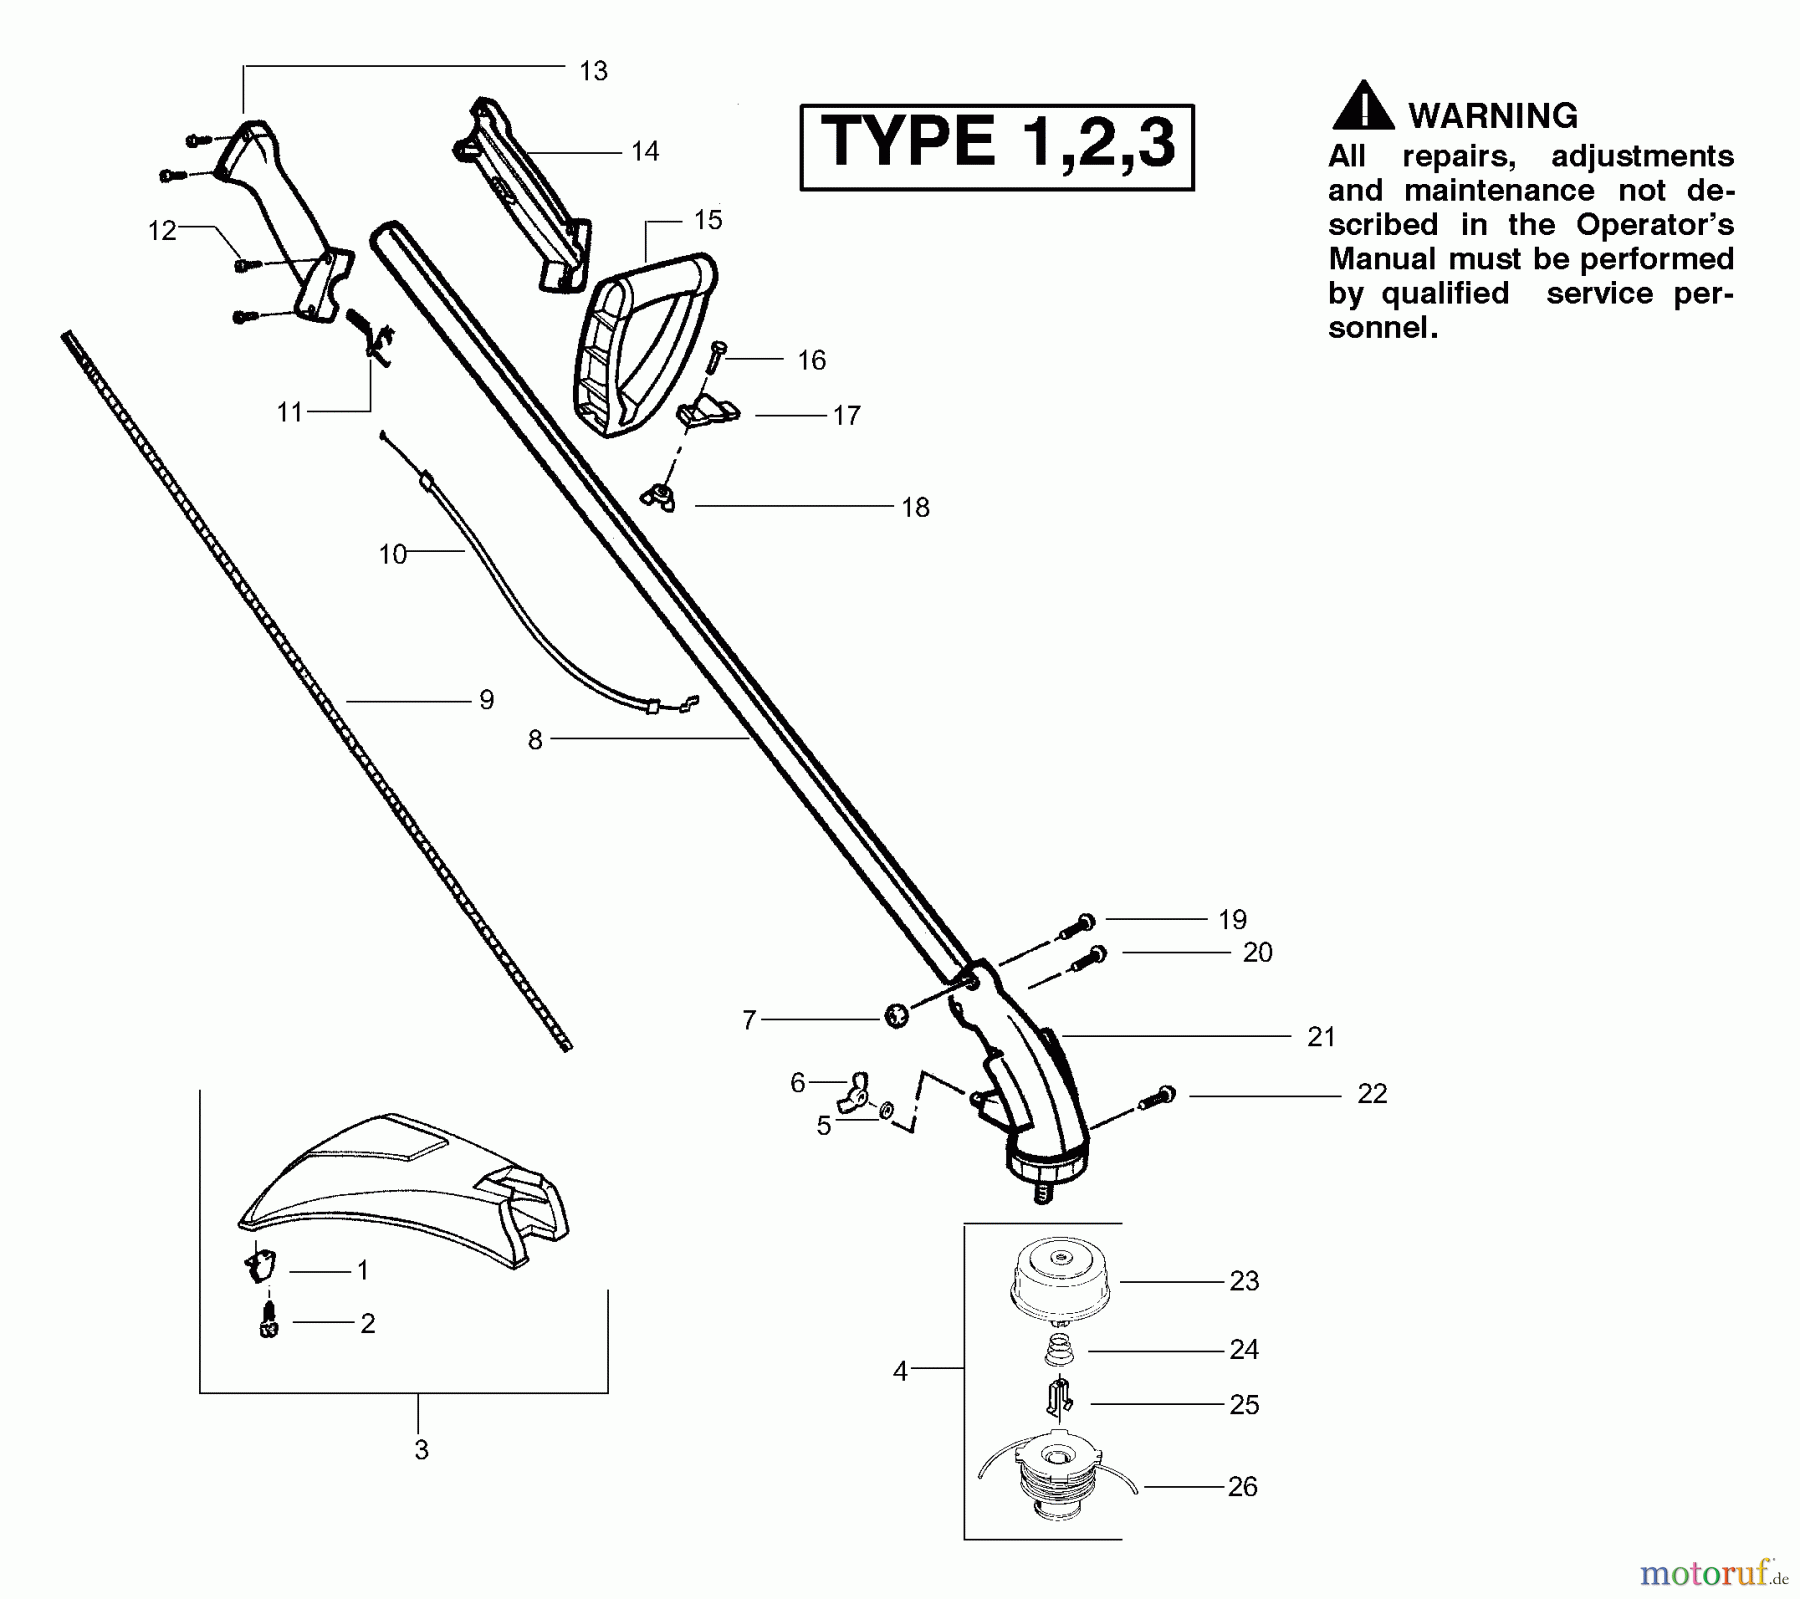  Poulan / Weed Eater Motorsensen, Trimmer SST (Type 3) - Weed Eater Featherlite LE String Trimmer Drive Shaft & Cutting Head